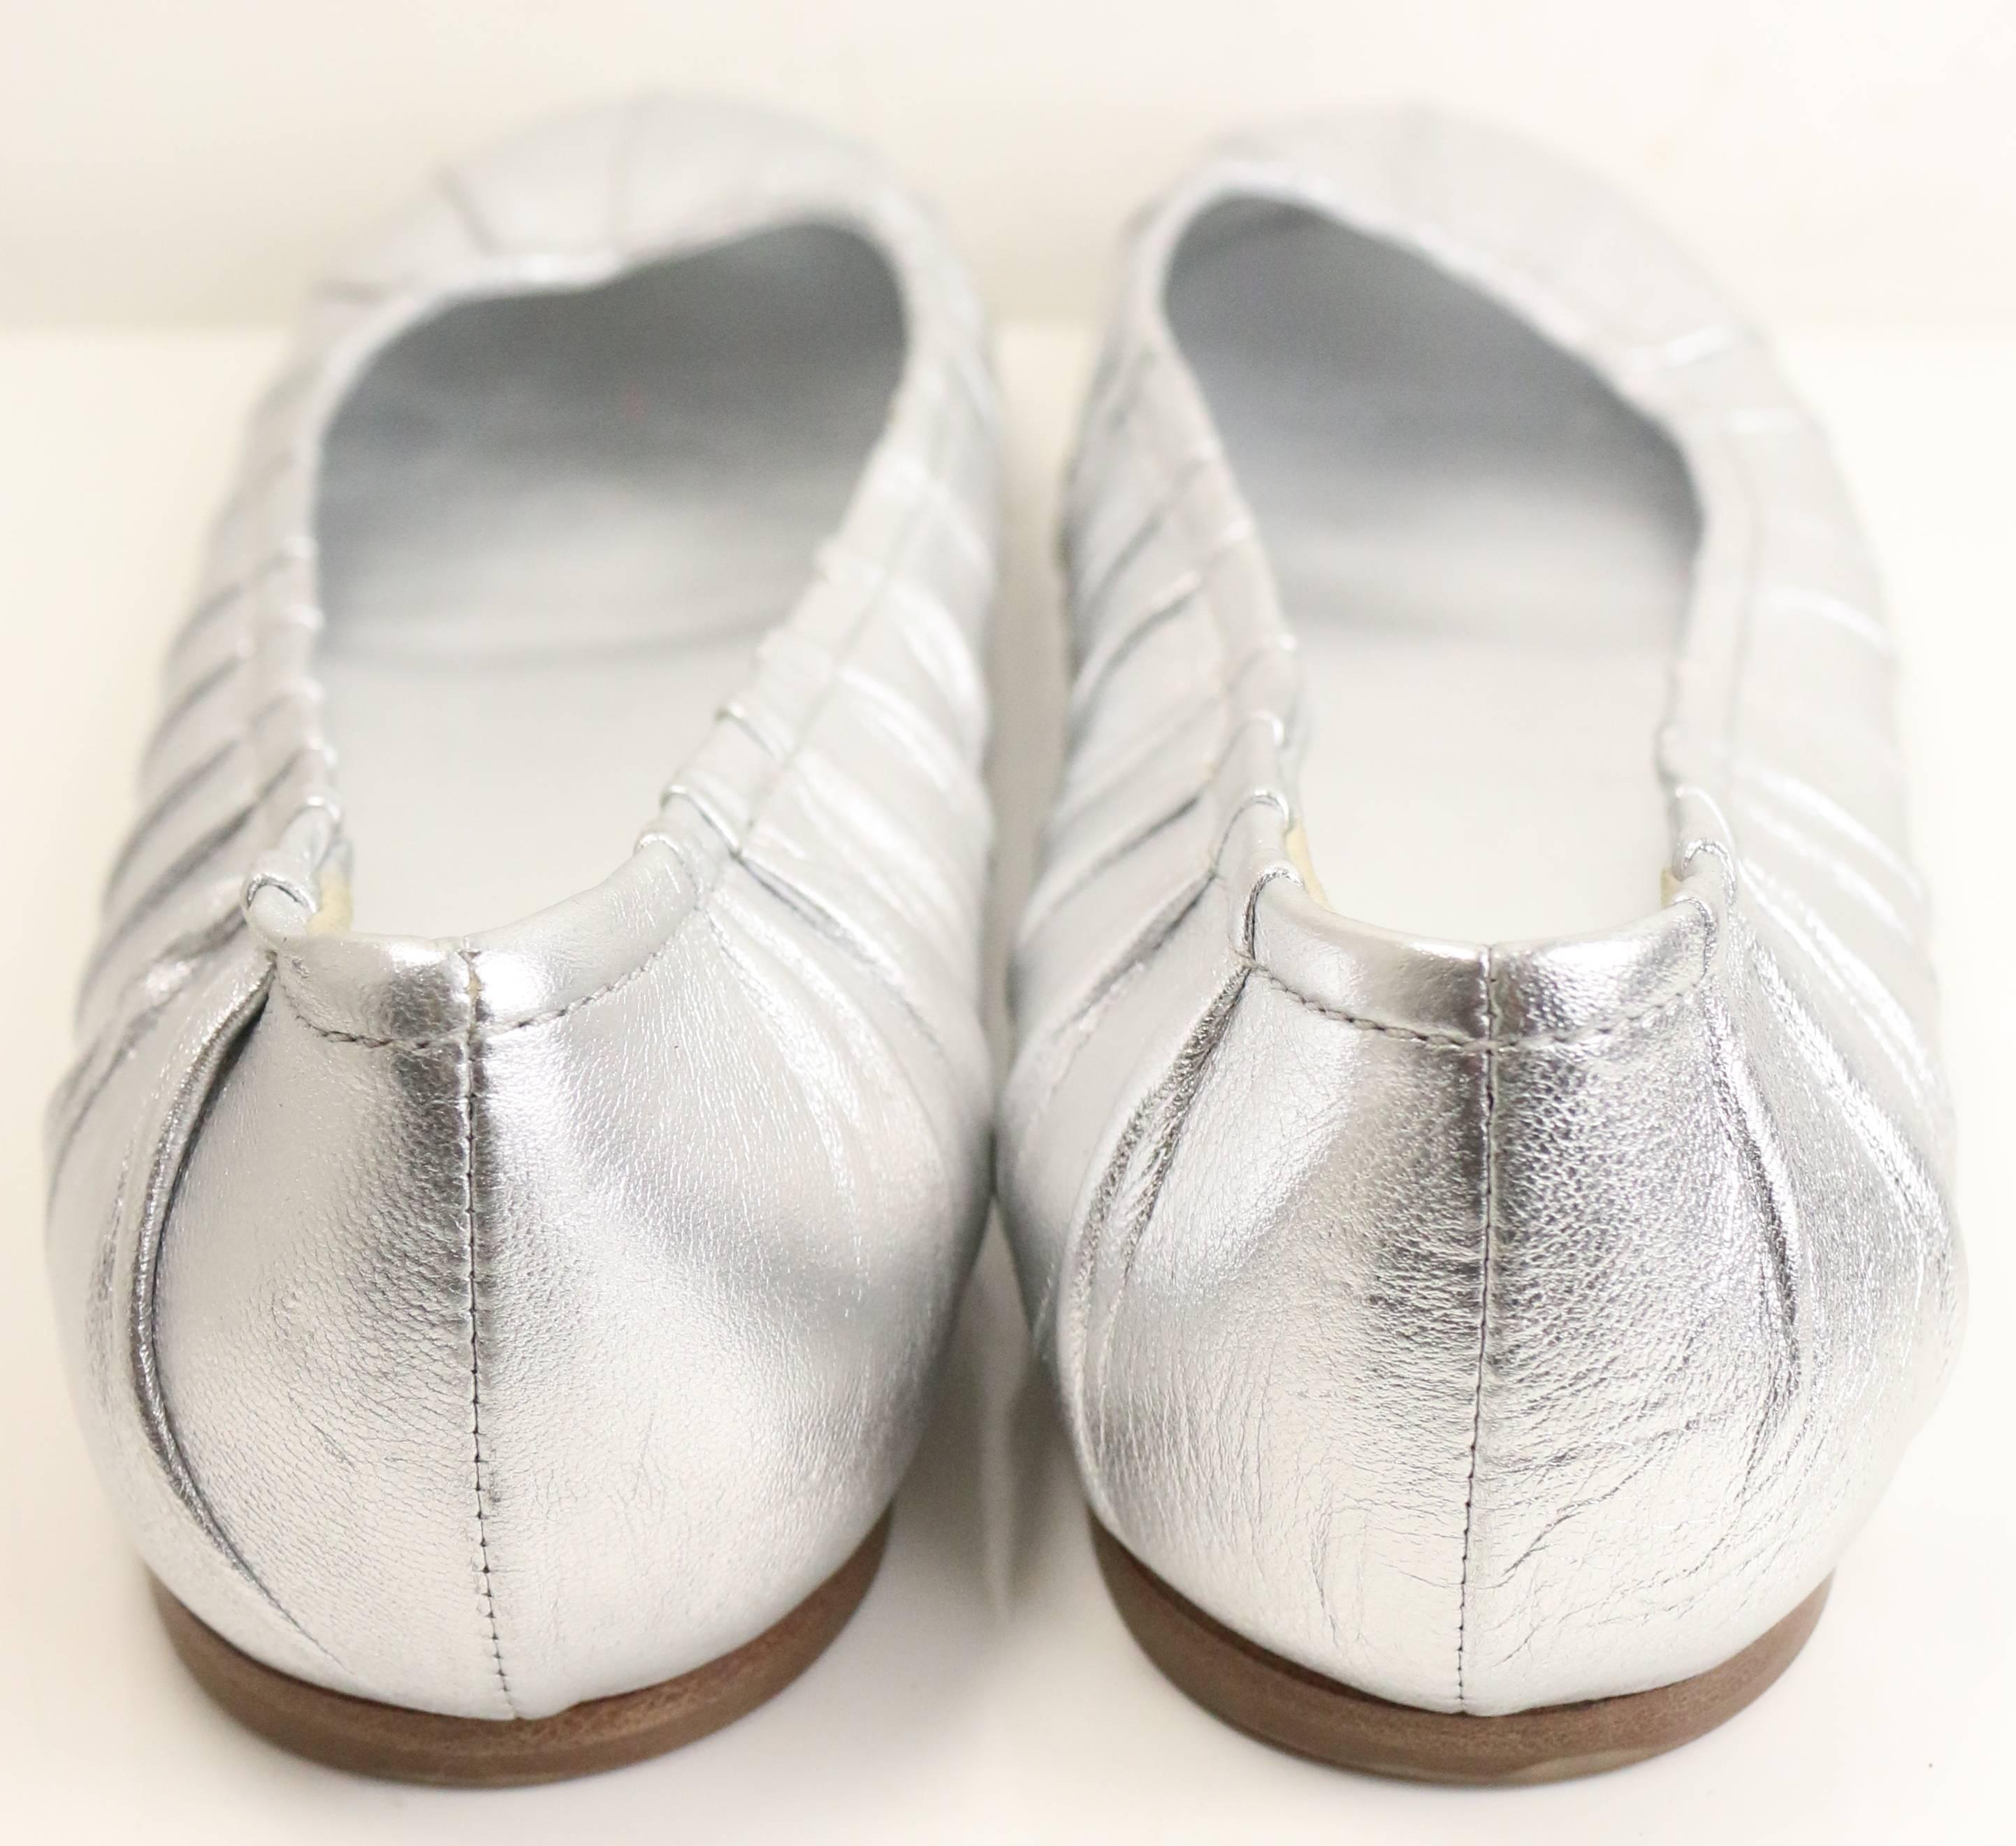 - Prada silver metallic leather flats with few pleated effect. Featuring a wooden sole. Chic and comfortable to wear. 

- Made in Italy. 

- Size 38. 

